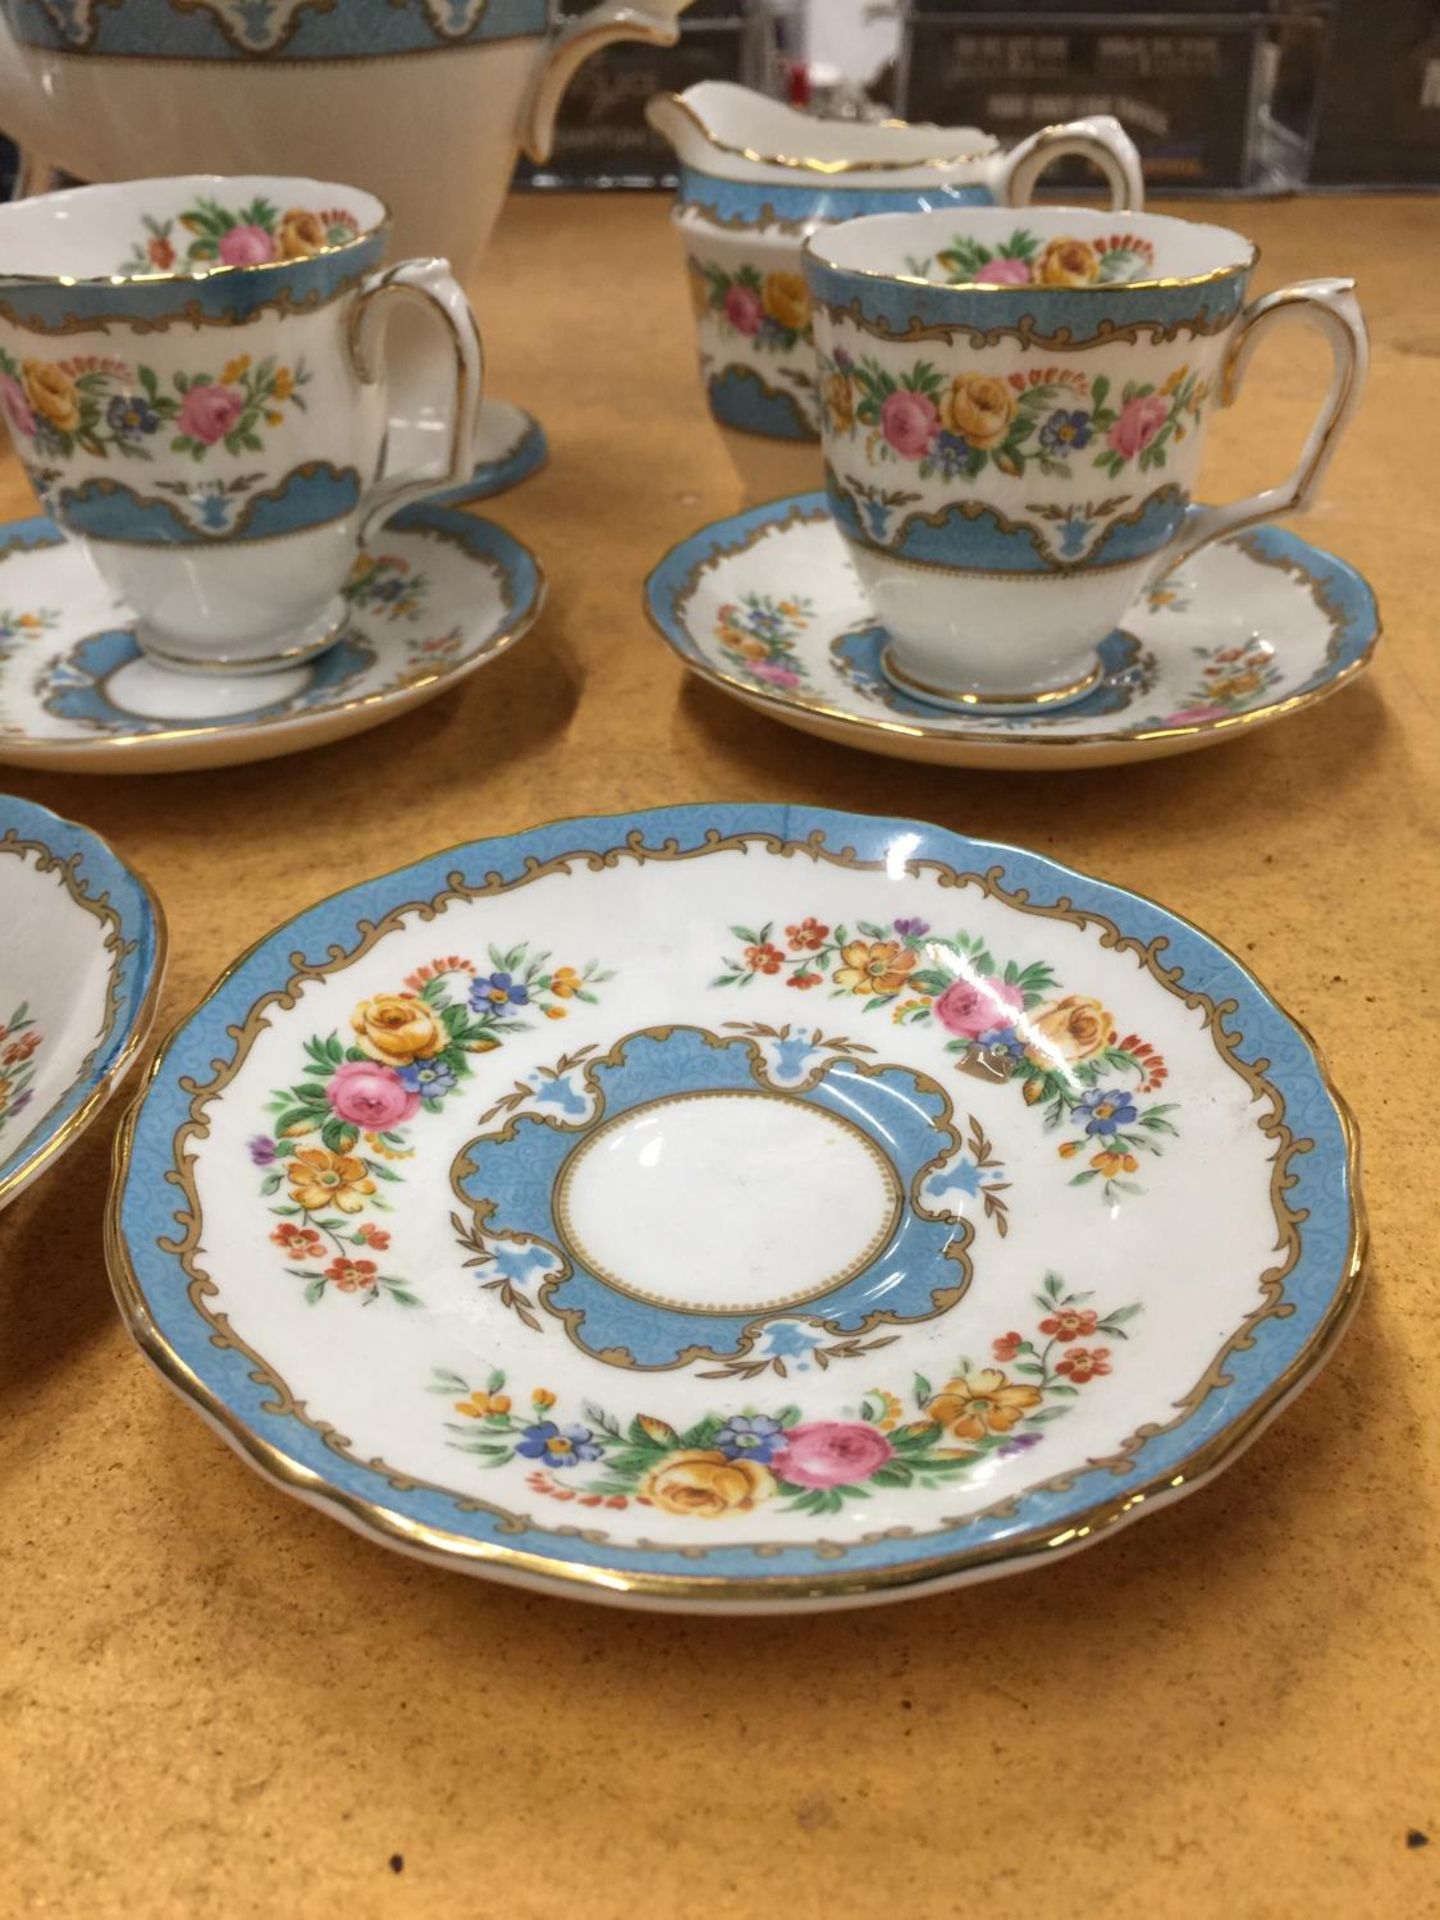 A CROWN STAFFORDSHIRE COFFEE SET IN A BLUE AND FLORAL PATTERN TO INCLUDE A COFFEE POT, CREAM JUG, - Image 3 of 4